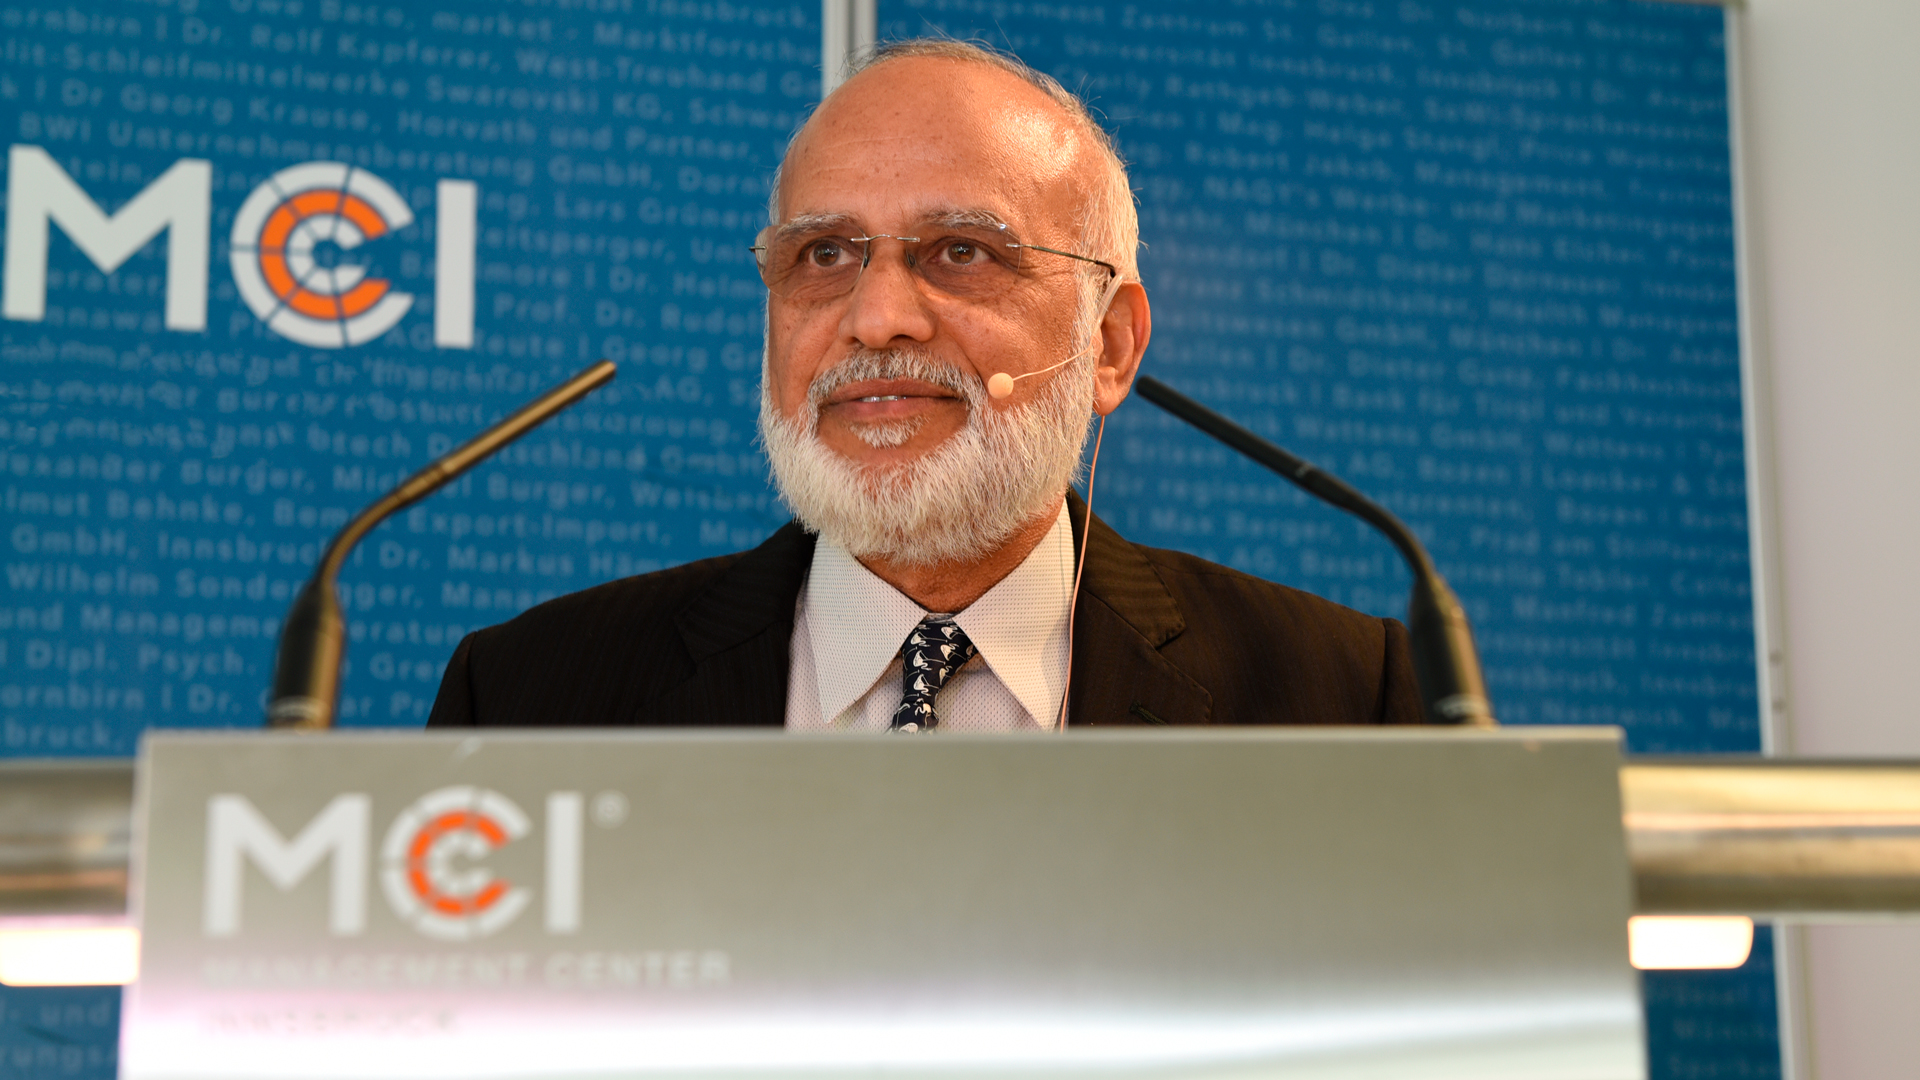 Mahender Khari, chair of the INDO-GLOBAL-ACADEMIA ALLIANCE based in London, supports the scholarship. ©MCI